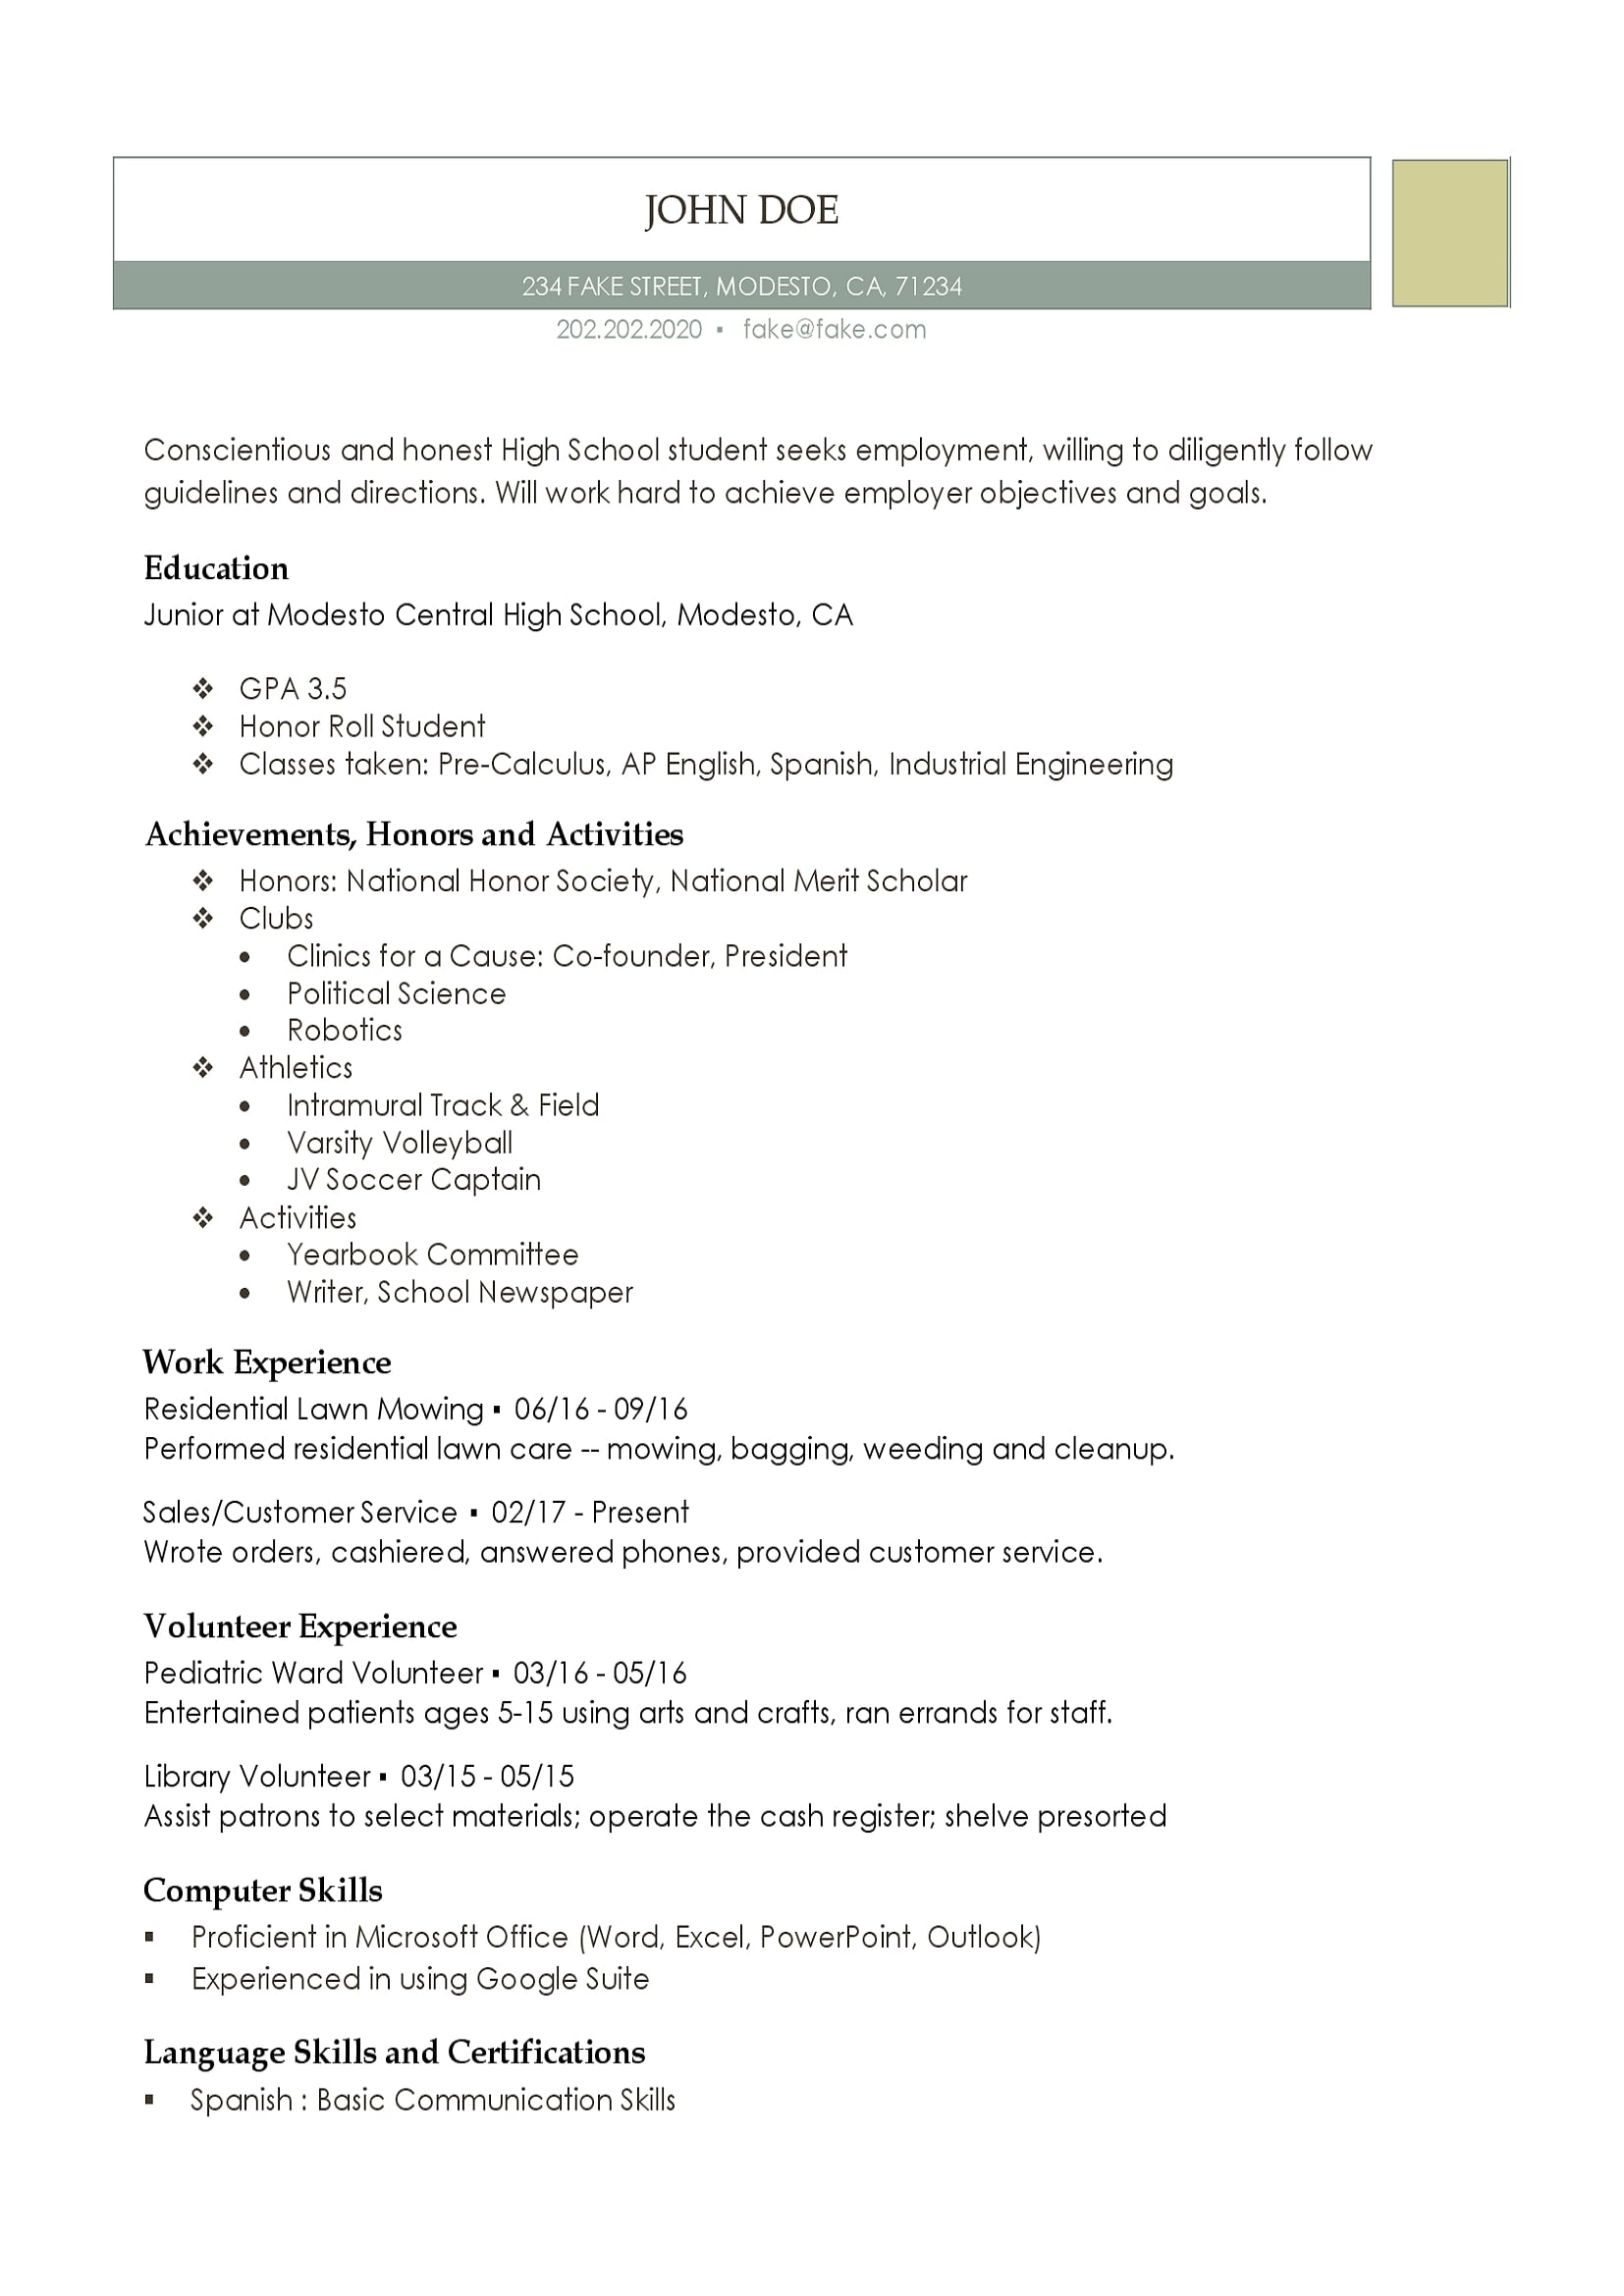 Resume For High School Student B0e9830d Adf6 4df7 9670 9330a339578a resume for high school student|wikiresume.com